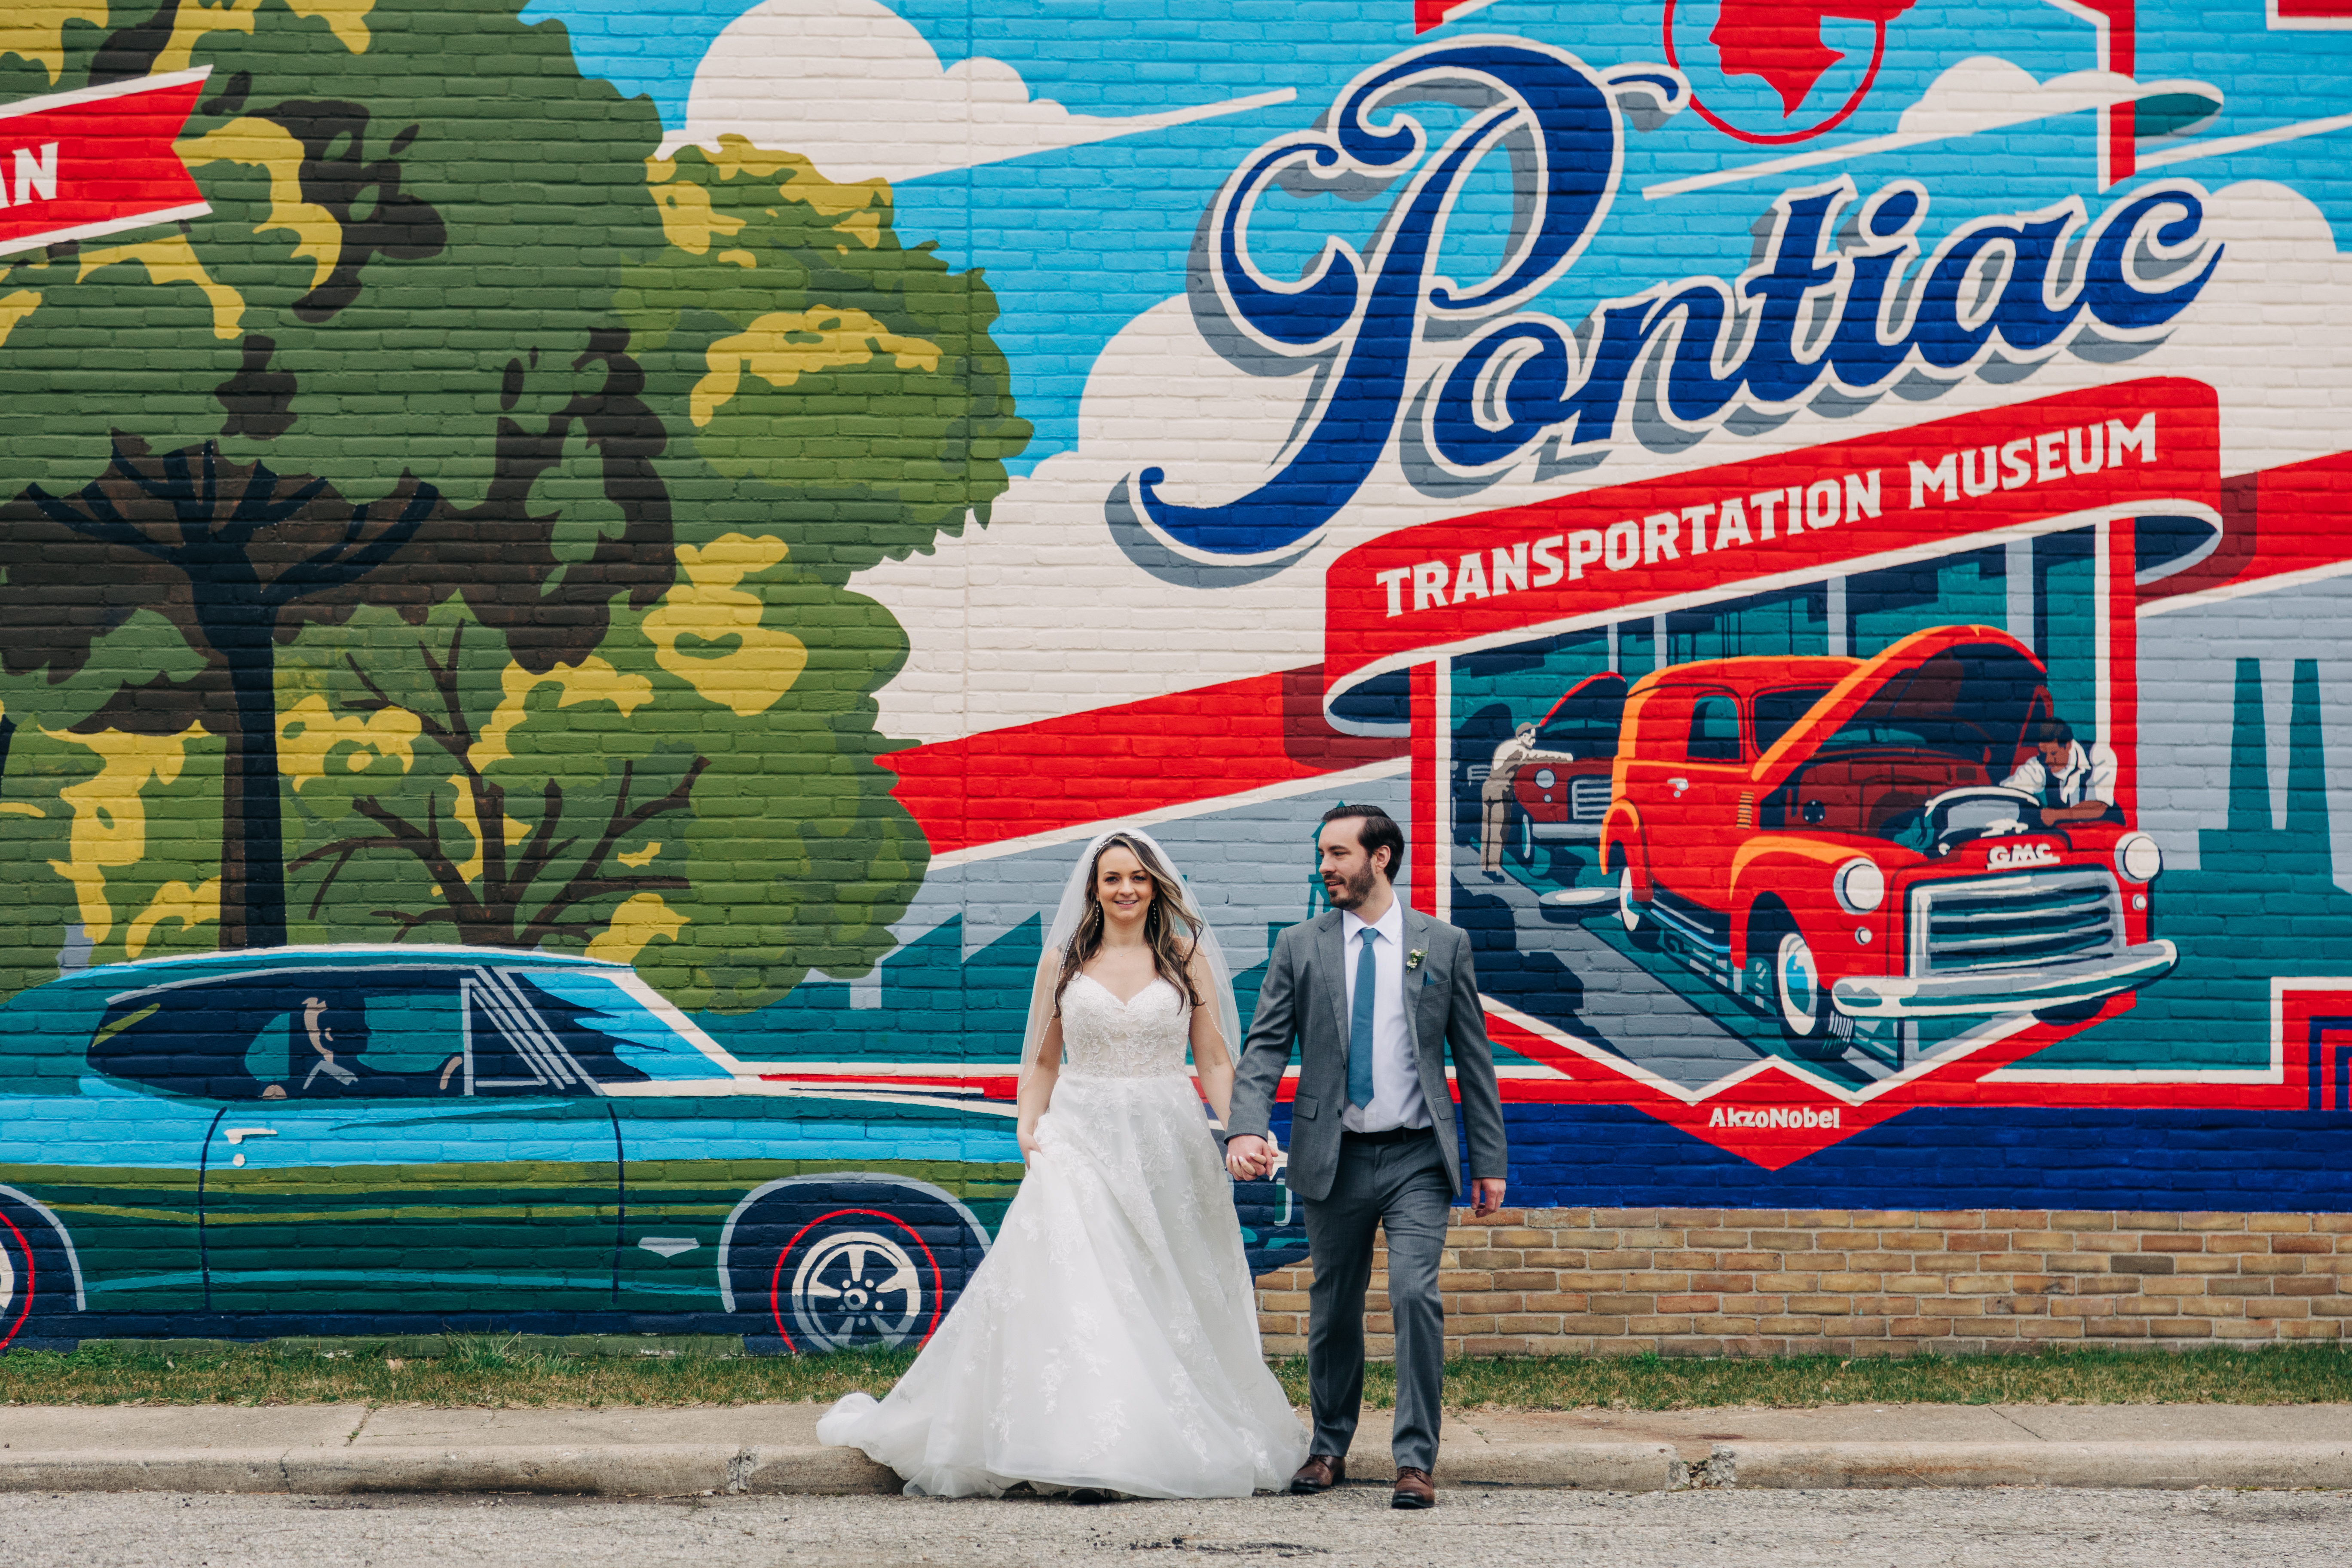 bride and groom at Pontiac Transportaion Museum